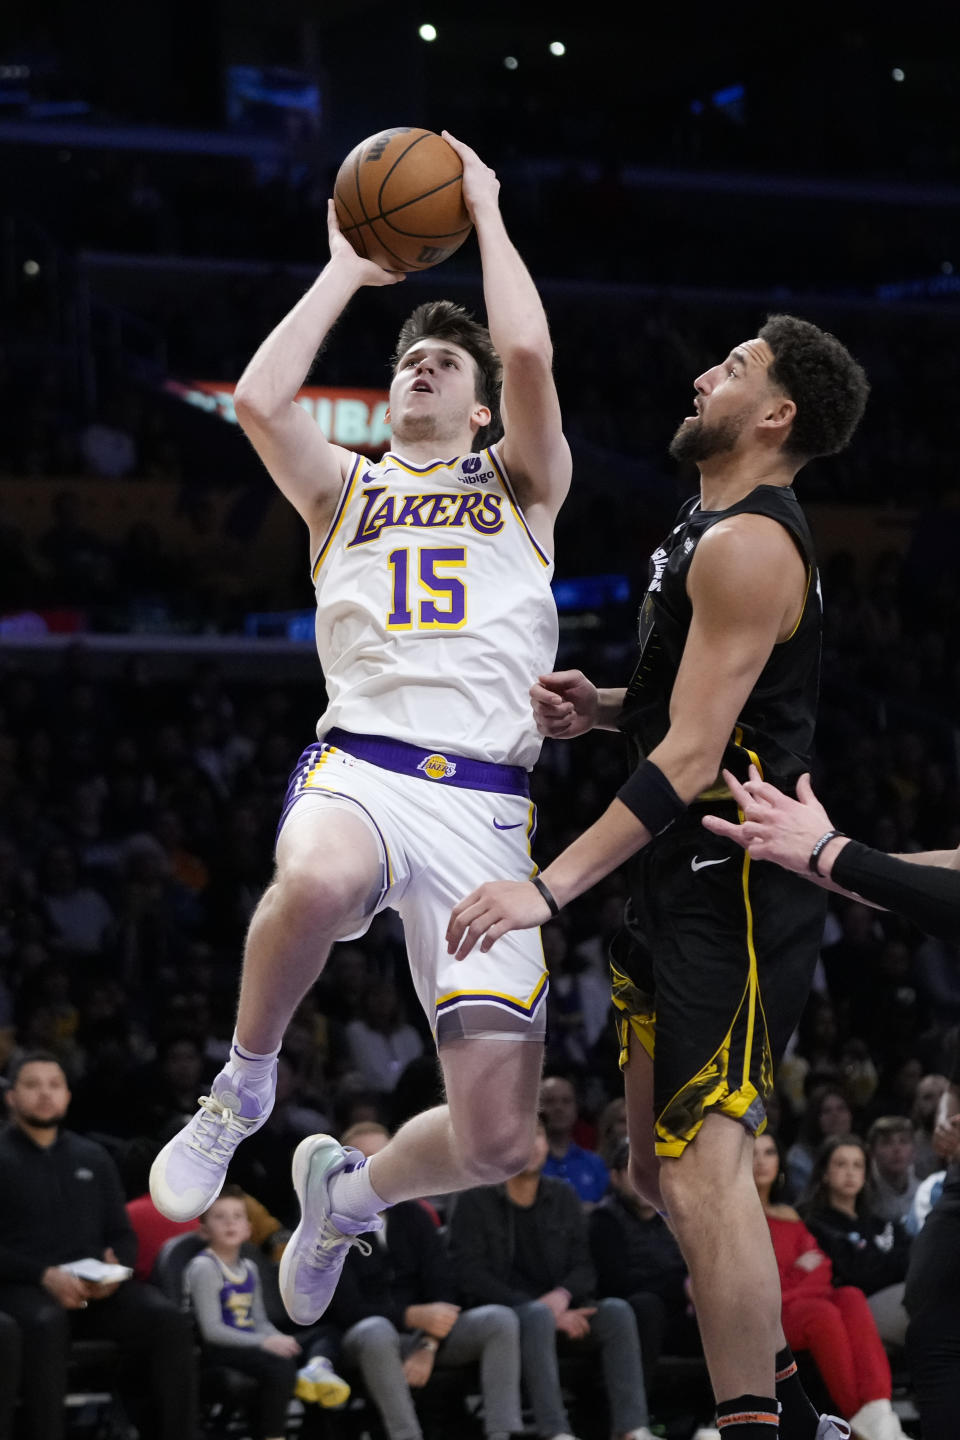 Los Angeles Lakers' Austin Reaves (15) puts up a shot as Golden State Warriors' Klay Thompson watches during the first half of an NBA basketball game, Sunday, March 5, 2023, in Los Angeles. (AP Photo/Jae C. Hong)